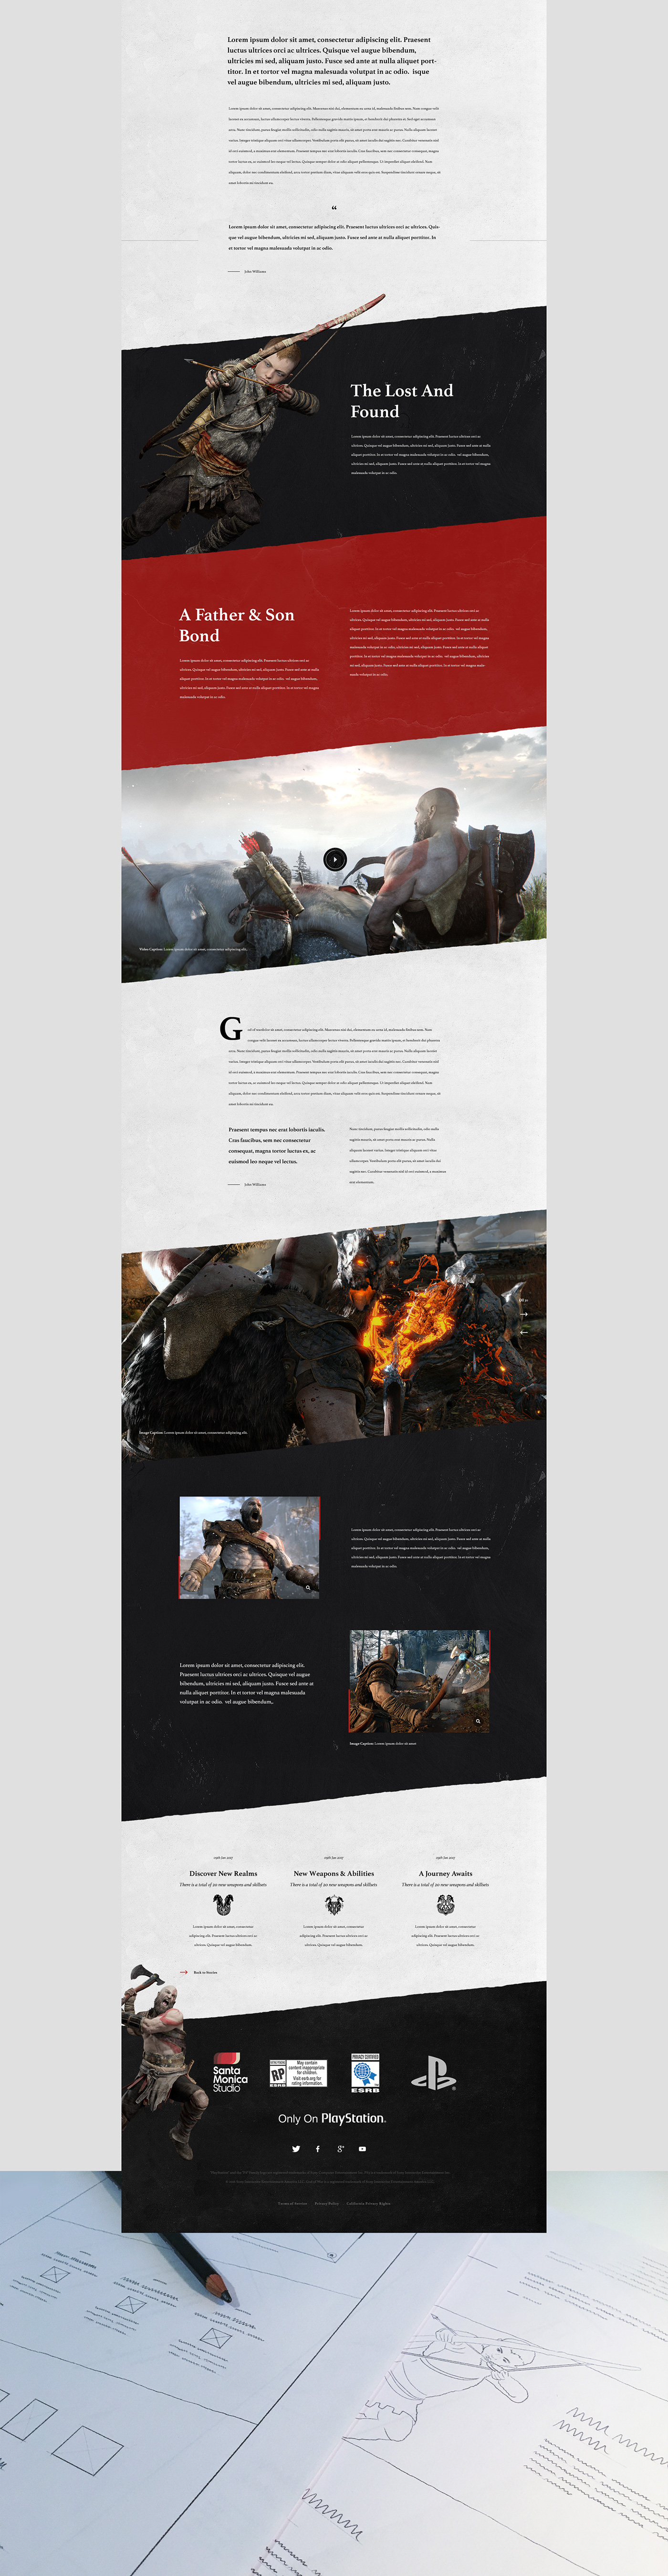 interactive game God of War Sony Web site ux